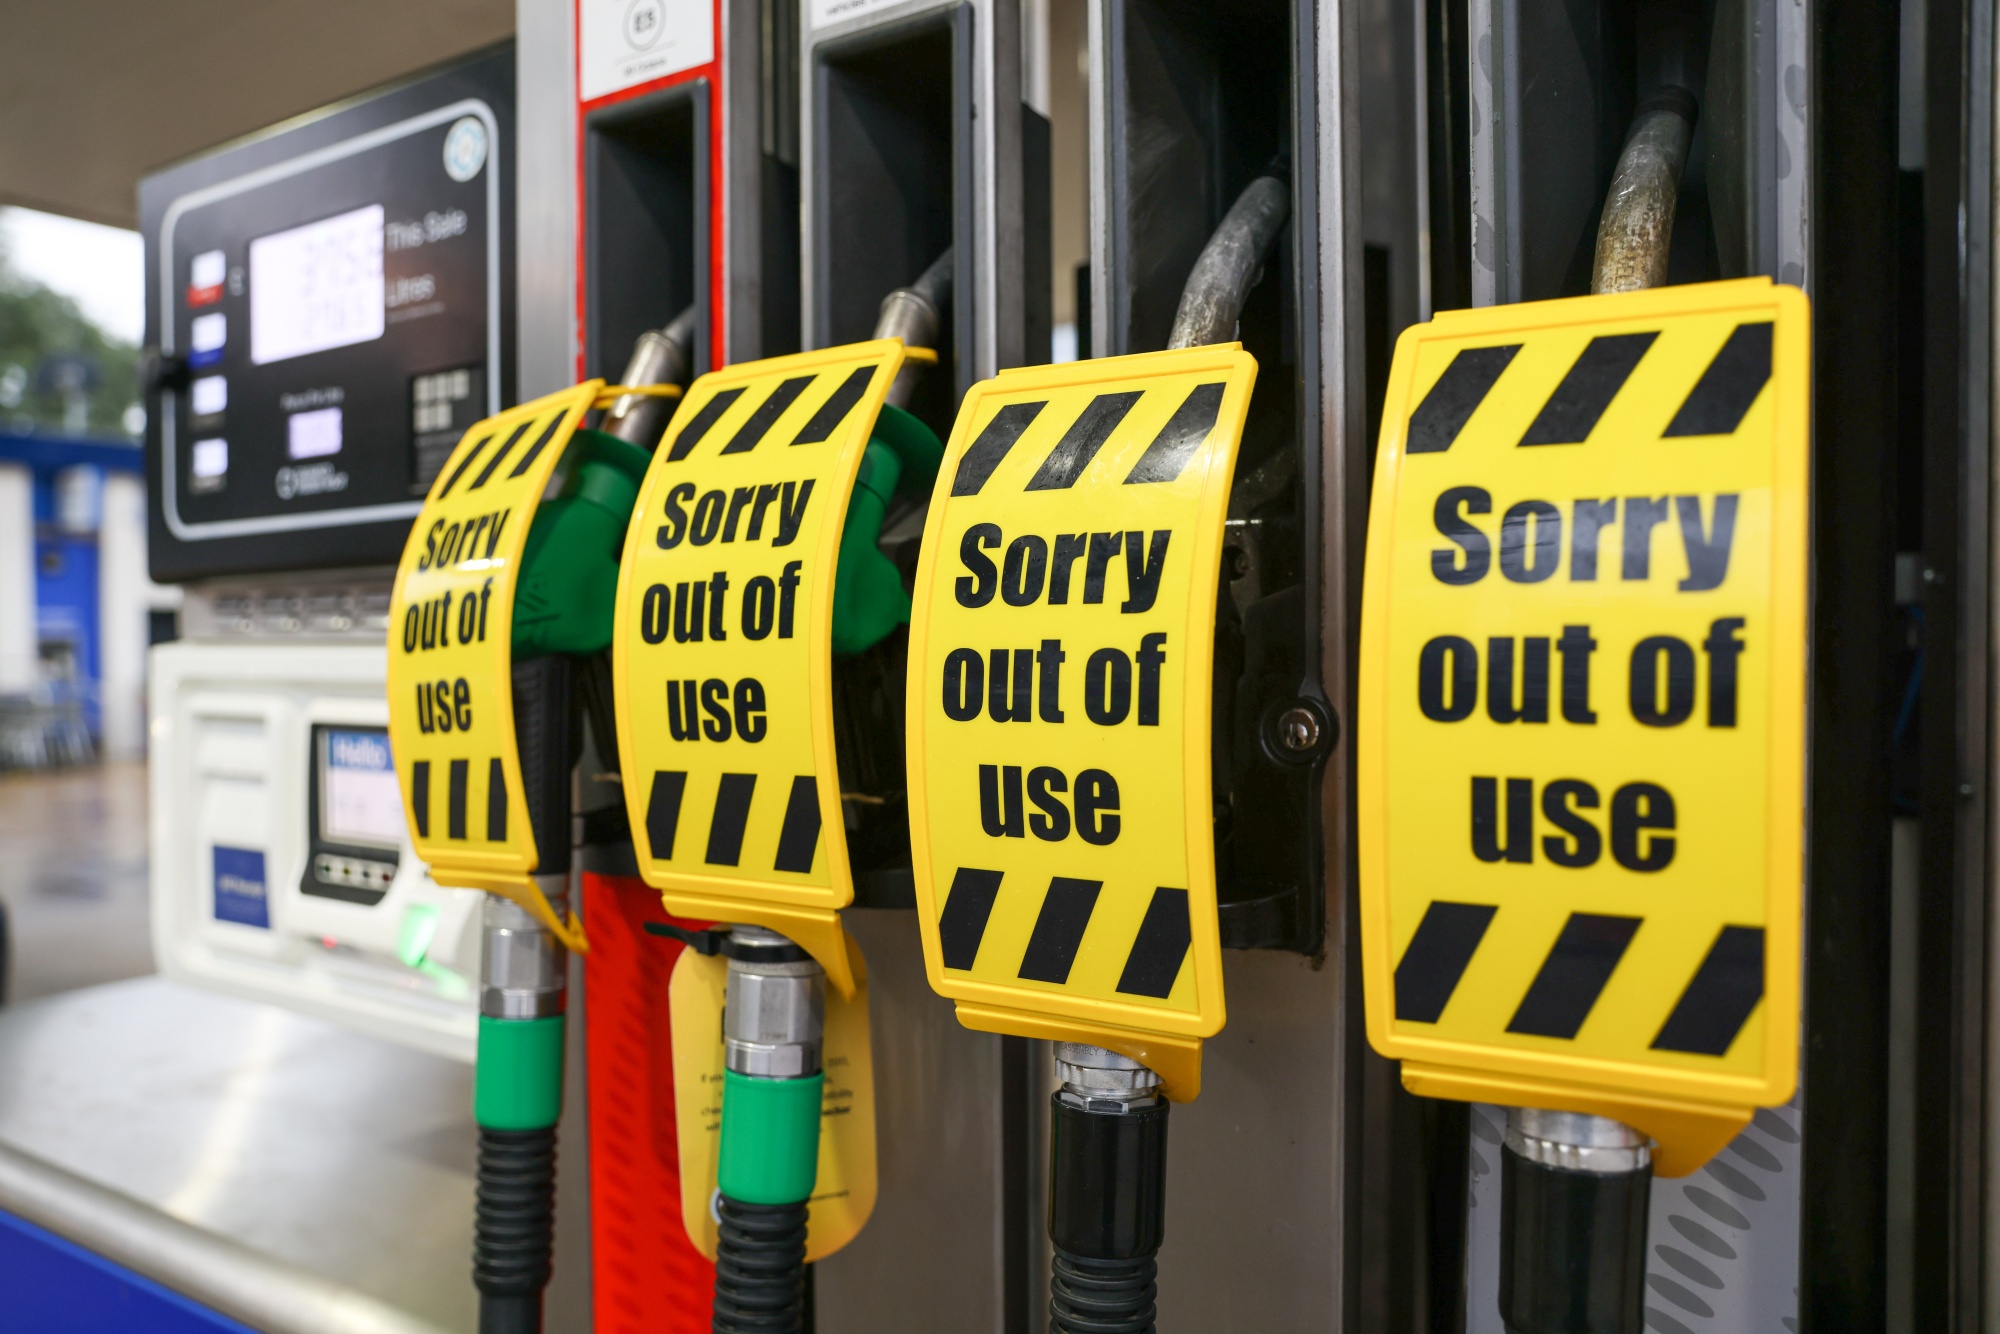 UK Government Plans to Suspend Competition Laws to Tackle Fuel Supply Crisis